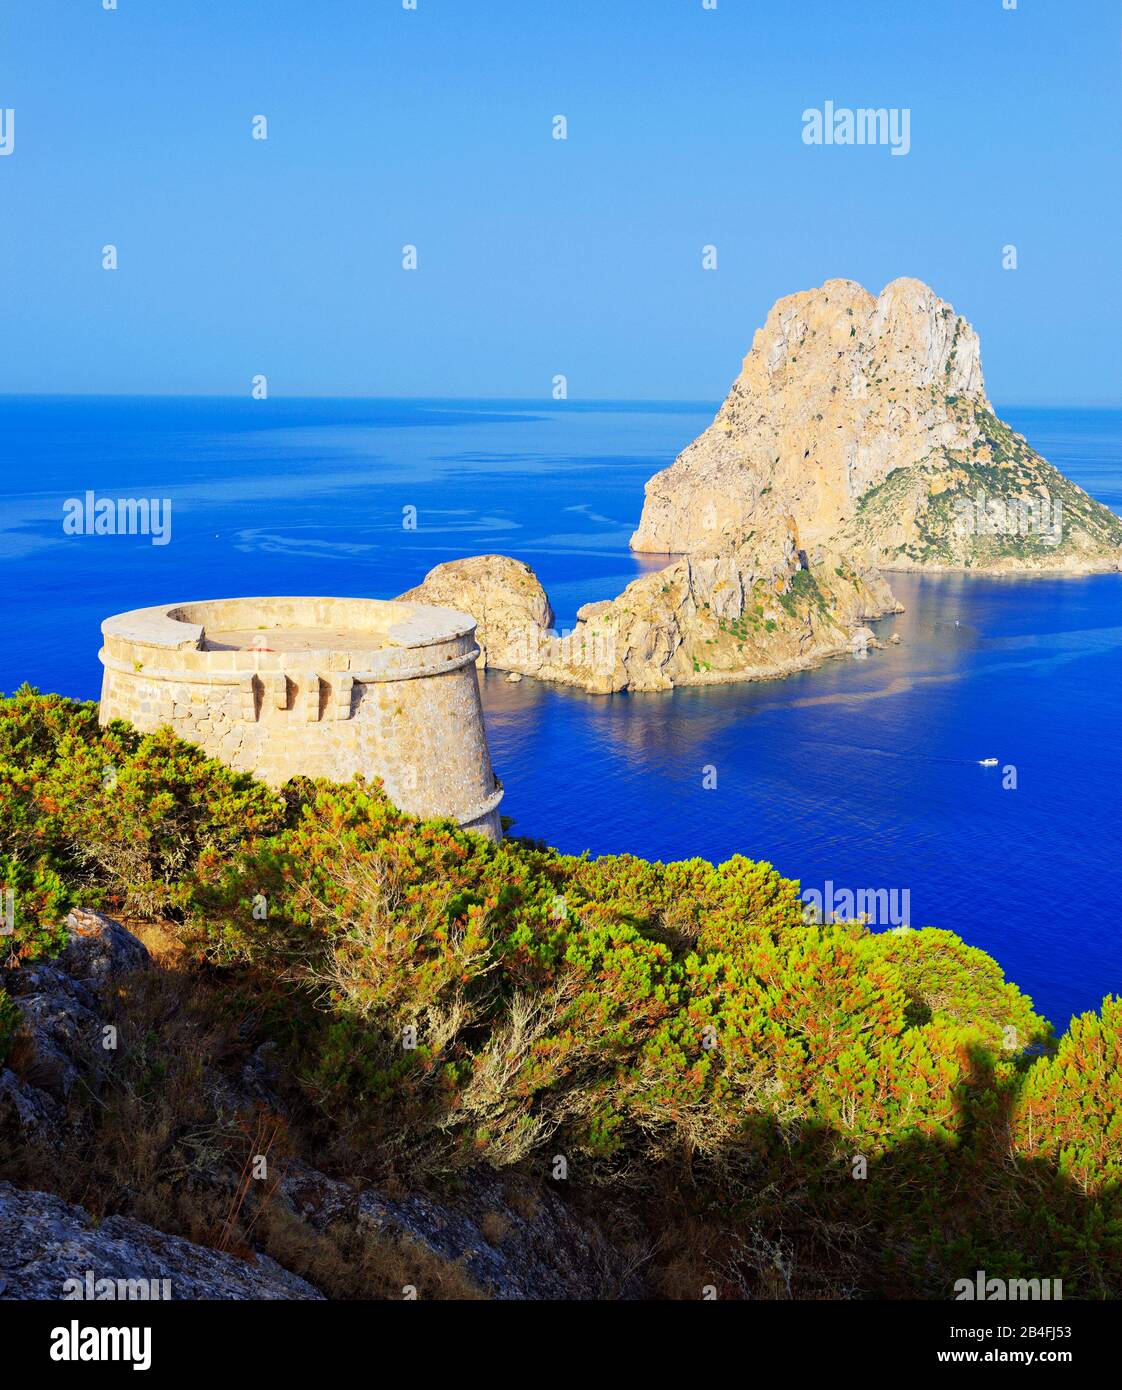 Torre des Savinar and Es Vedra Islets in background, Ibiza, Balearic Islands, Spain, Stock Photo